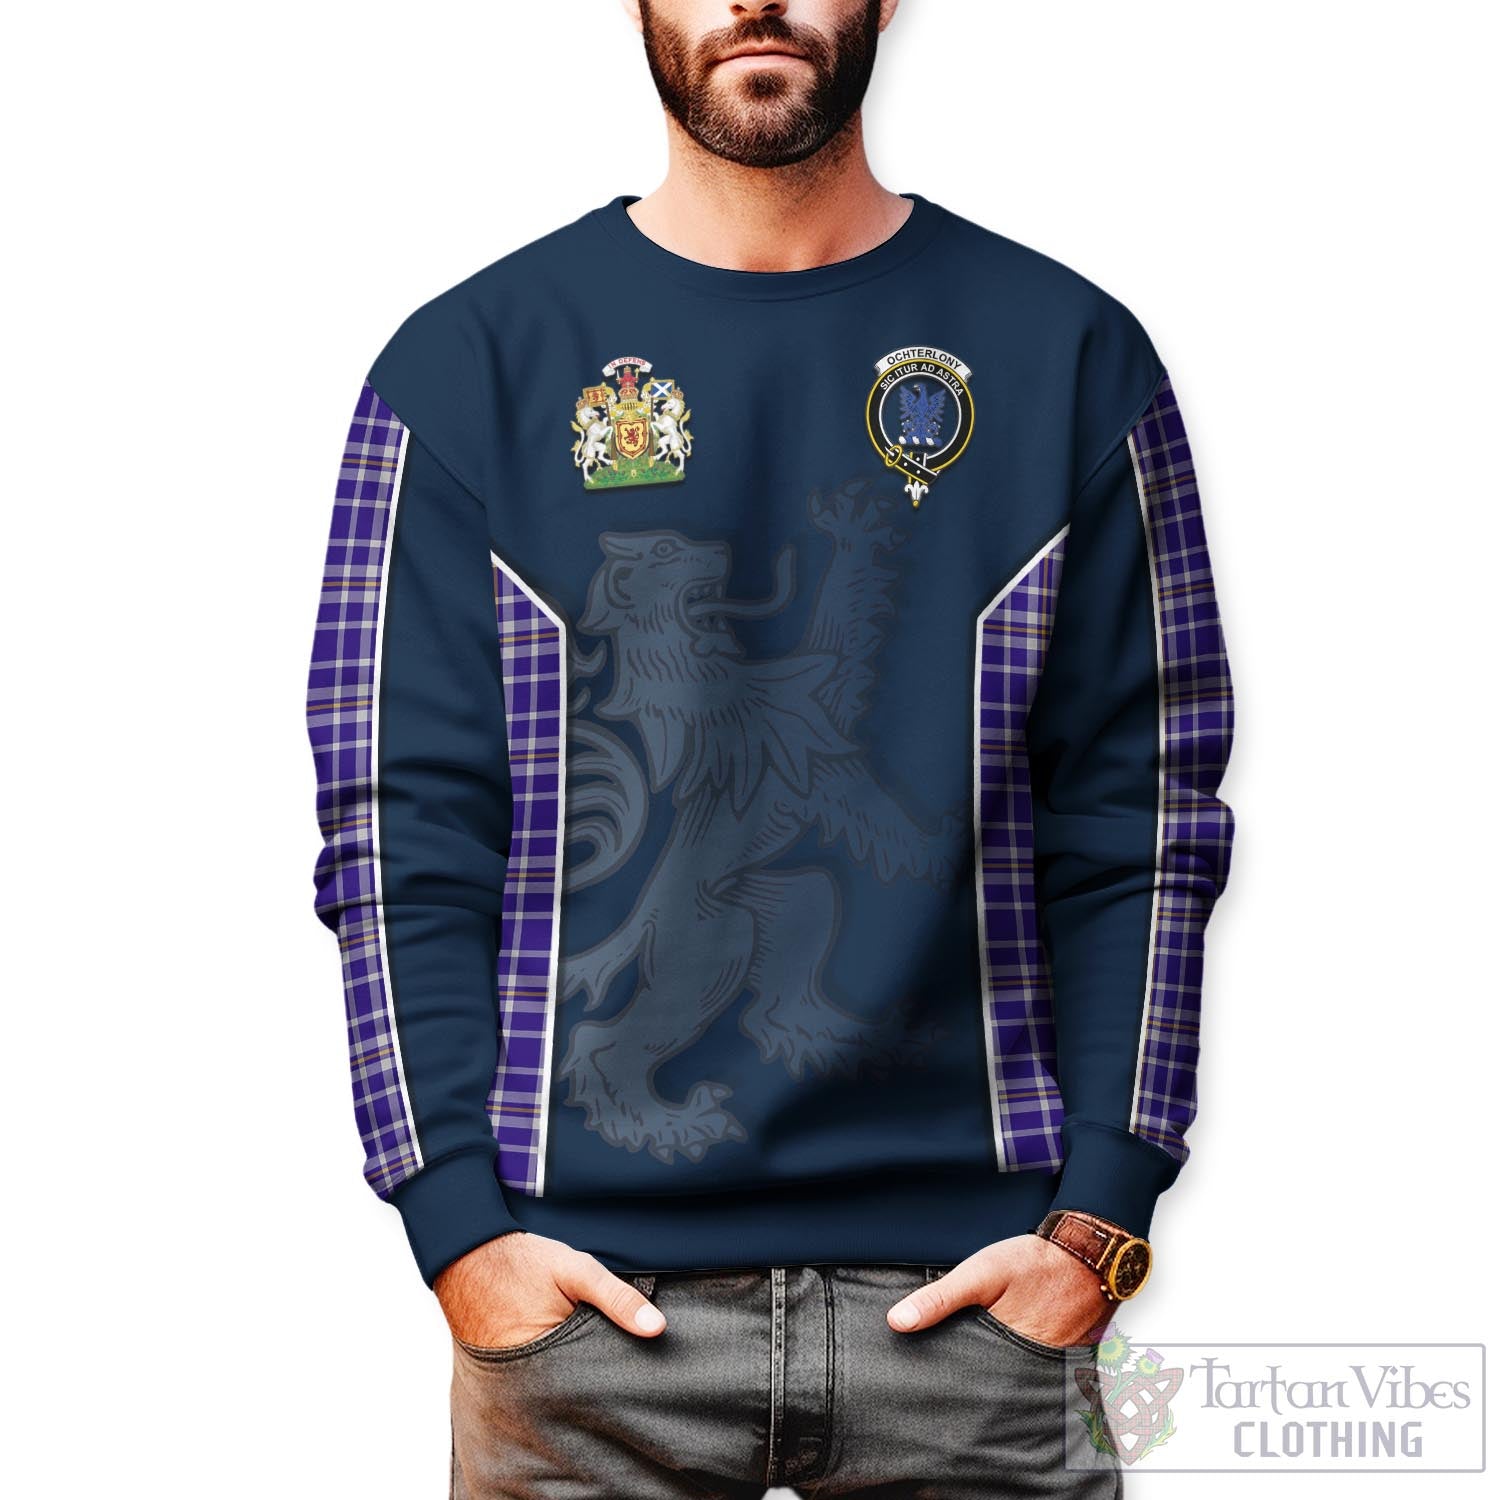 Tartan Vibes Clothing Ochterlony Tartan Sweater with Family Crest and Lion Rampant Vibes Sport Style